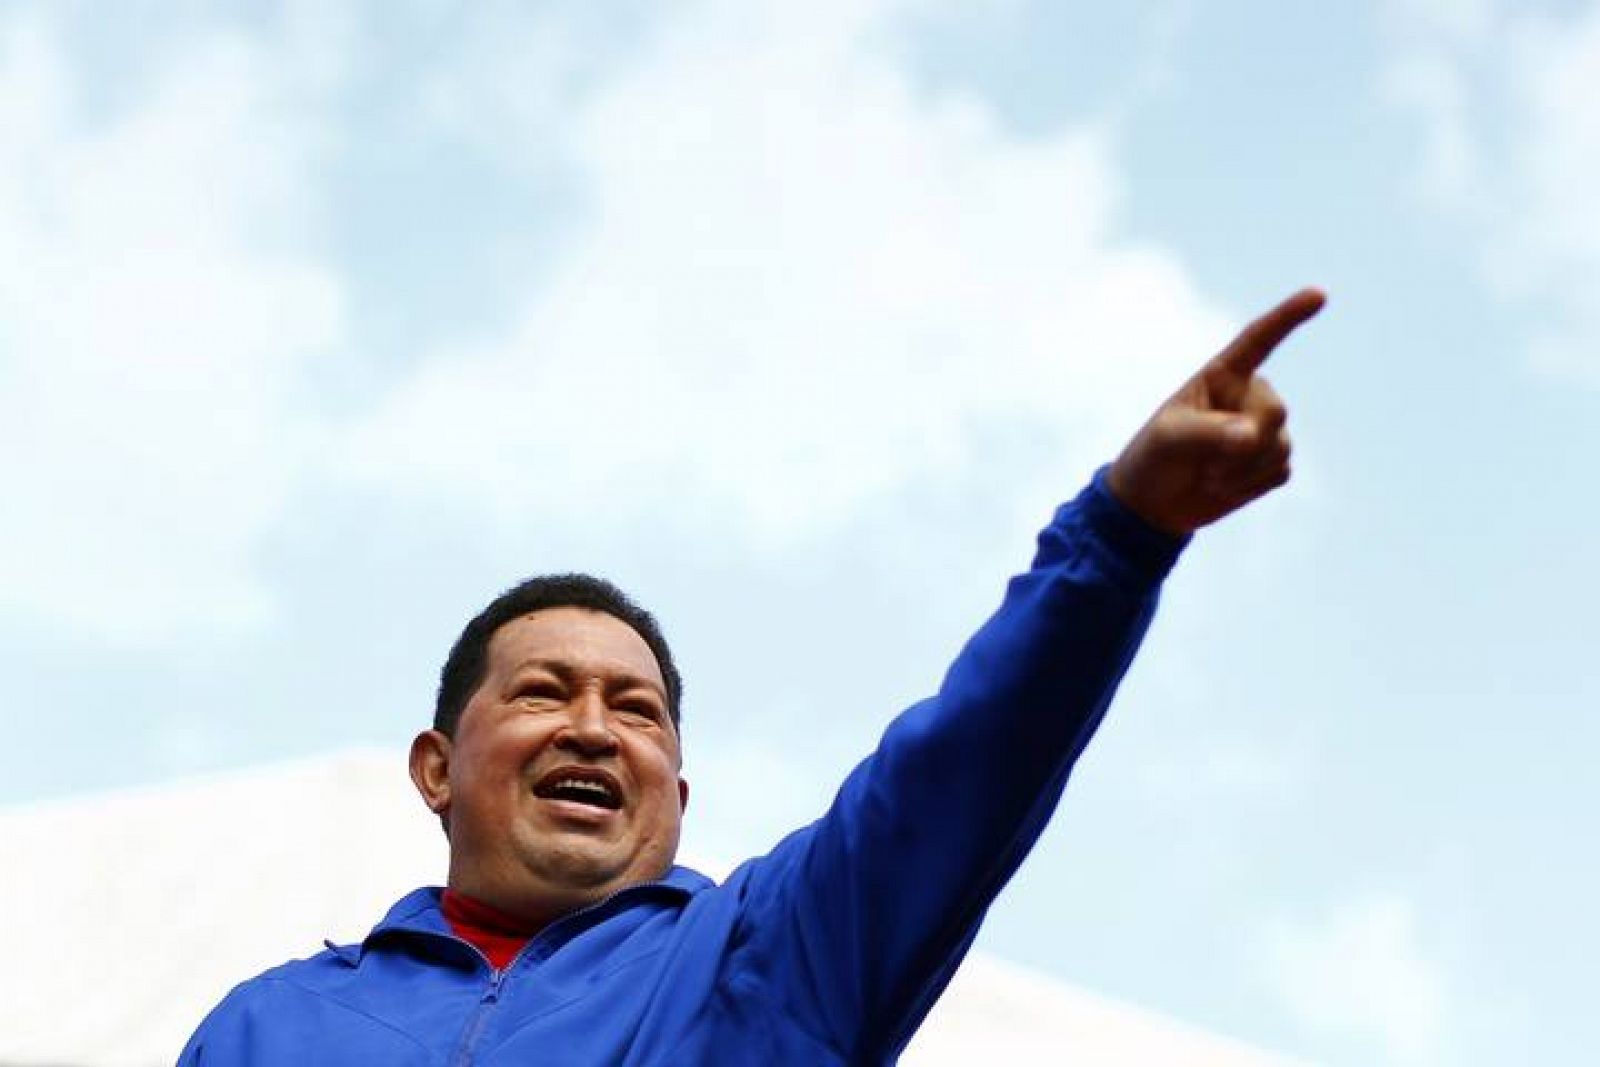 Venezuela's President and presidential candidate Hugo Chavez gestures to supporters during a campaign rally in Maracay